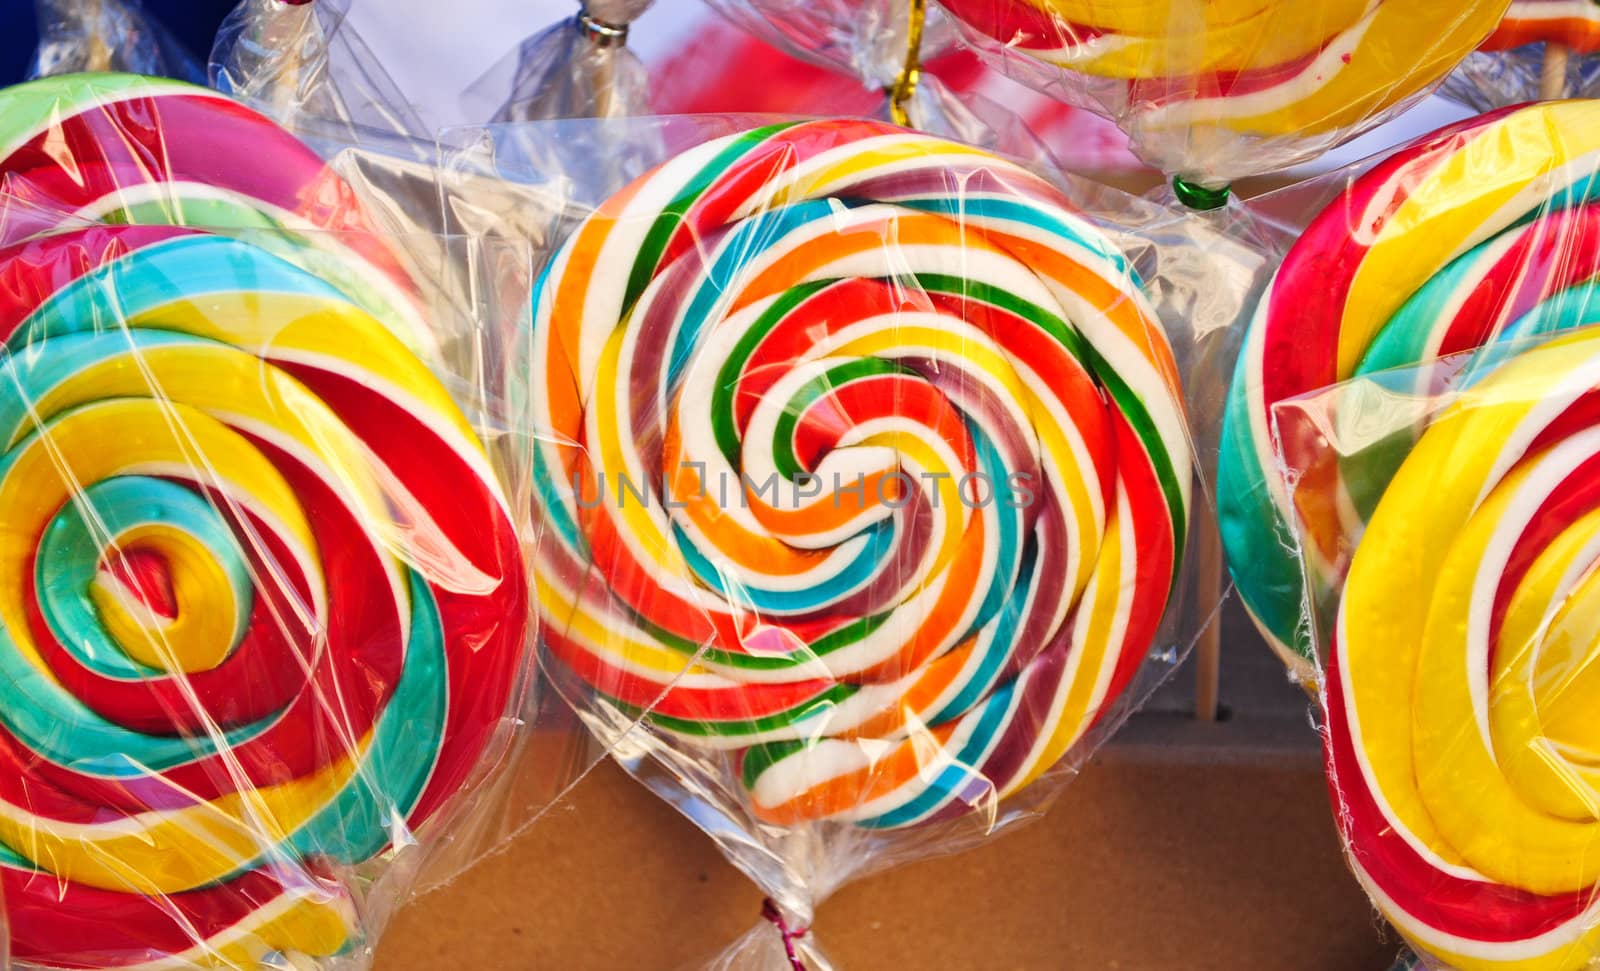 Very beautifull colourfull lollipos with green, orange, blue and red